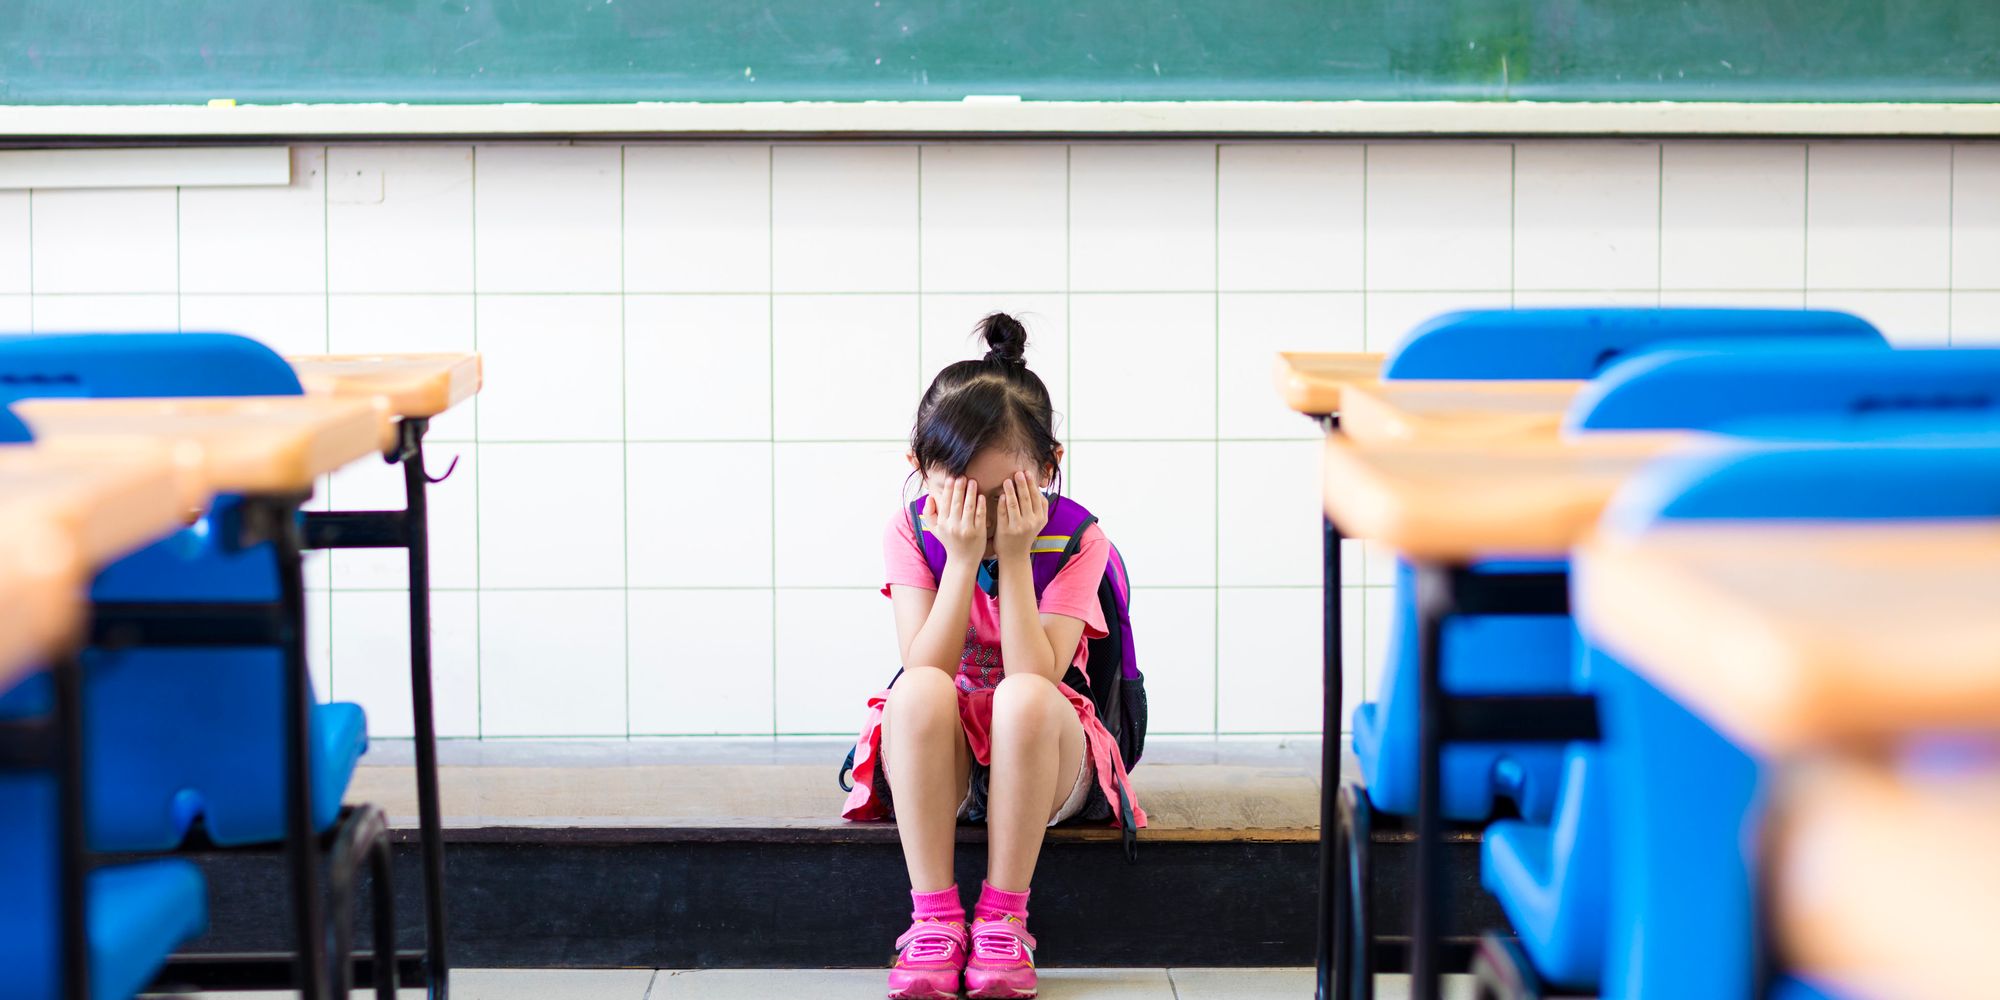 The Key To Reducing School Suspensions? Treat Kids With Empathy, Says Study